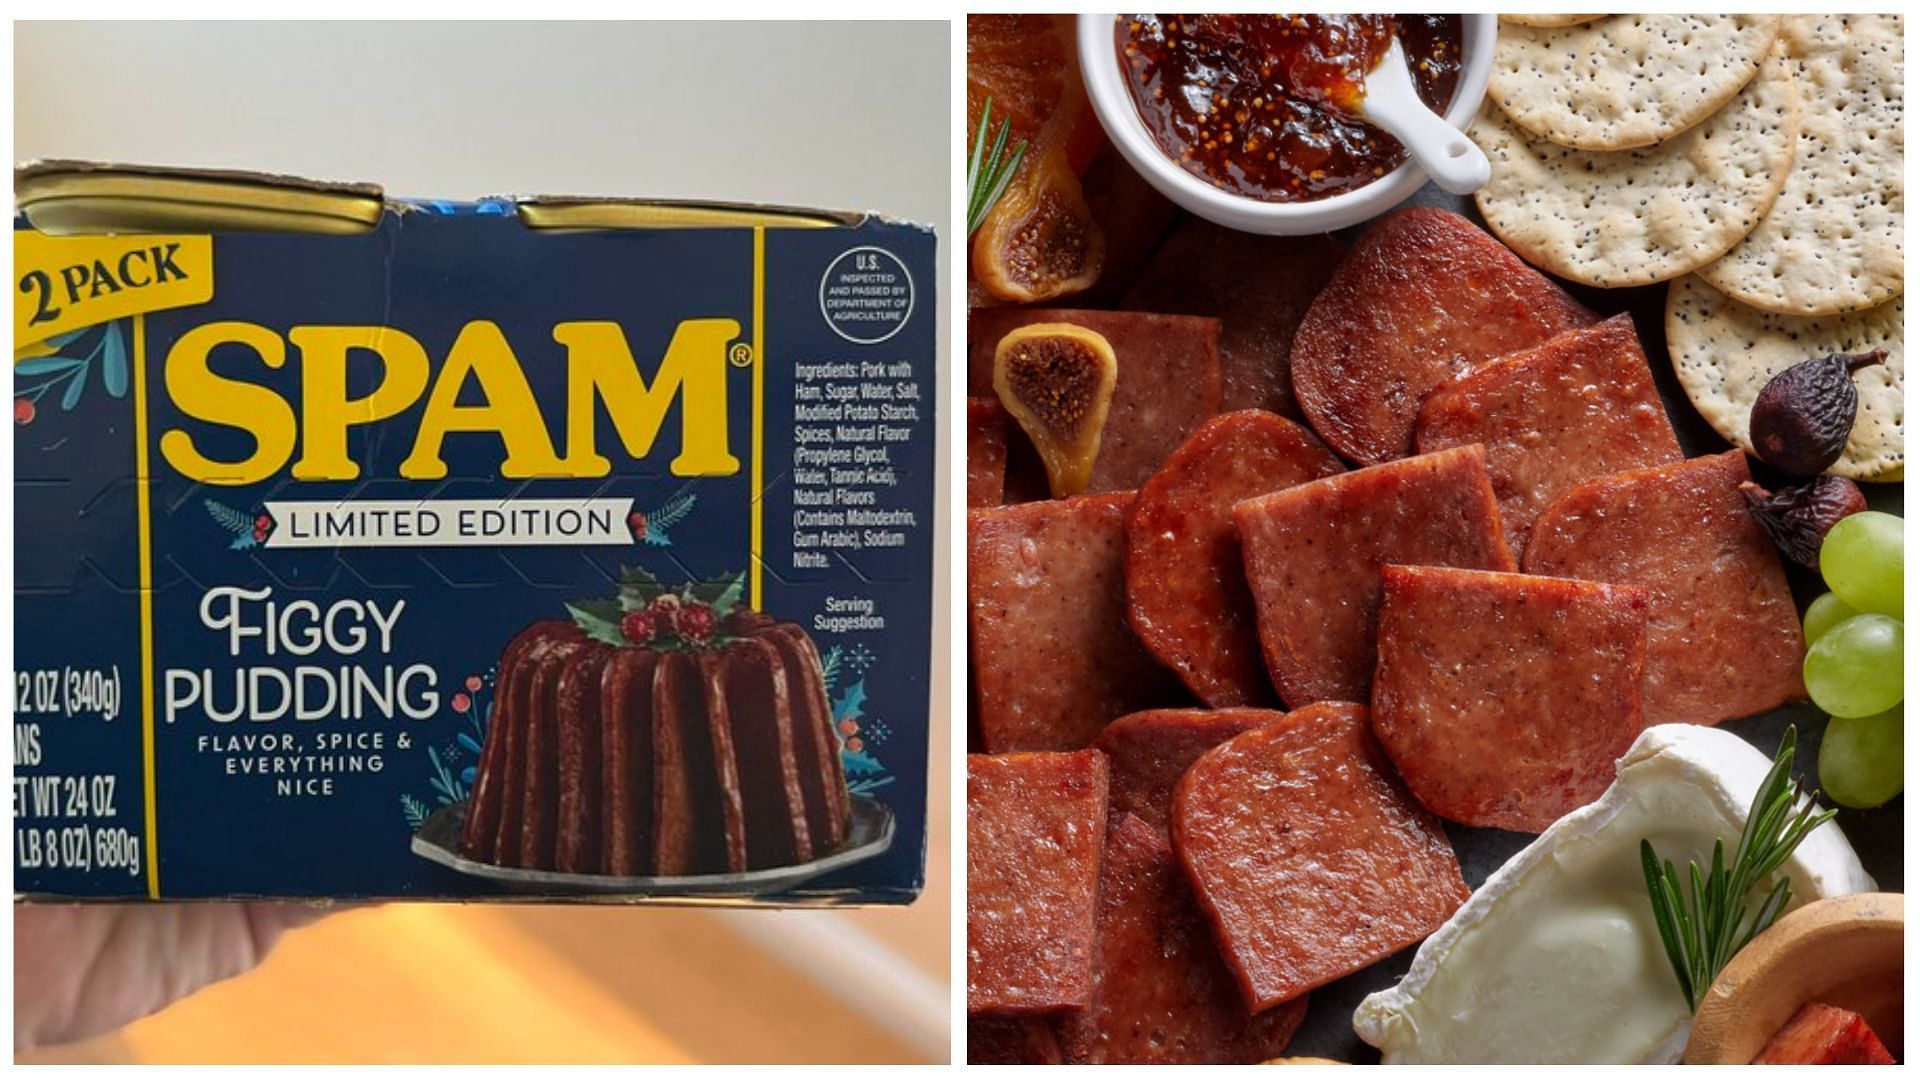 Spam Releases Figgy Pudding Flavor for the Holidays